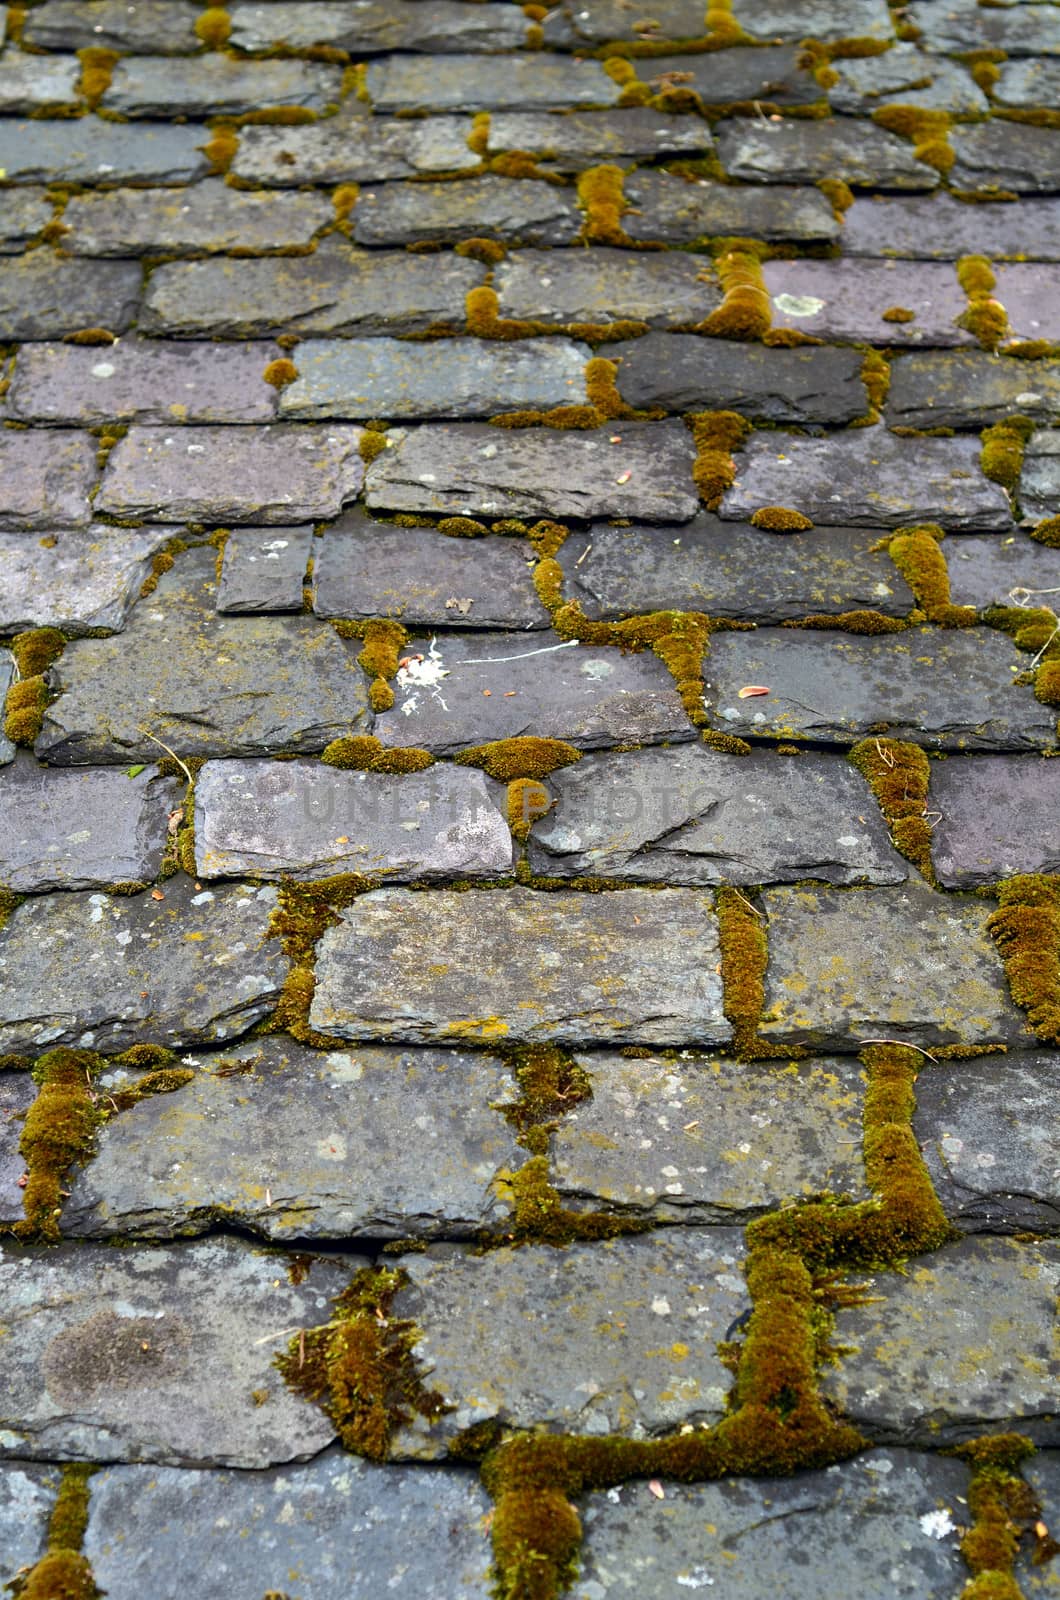 Some Old Slate Roof Tiles With Moss (Shallow DOF)